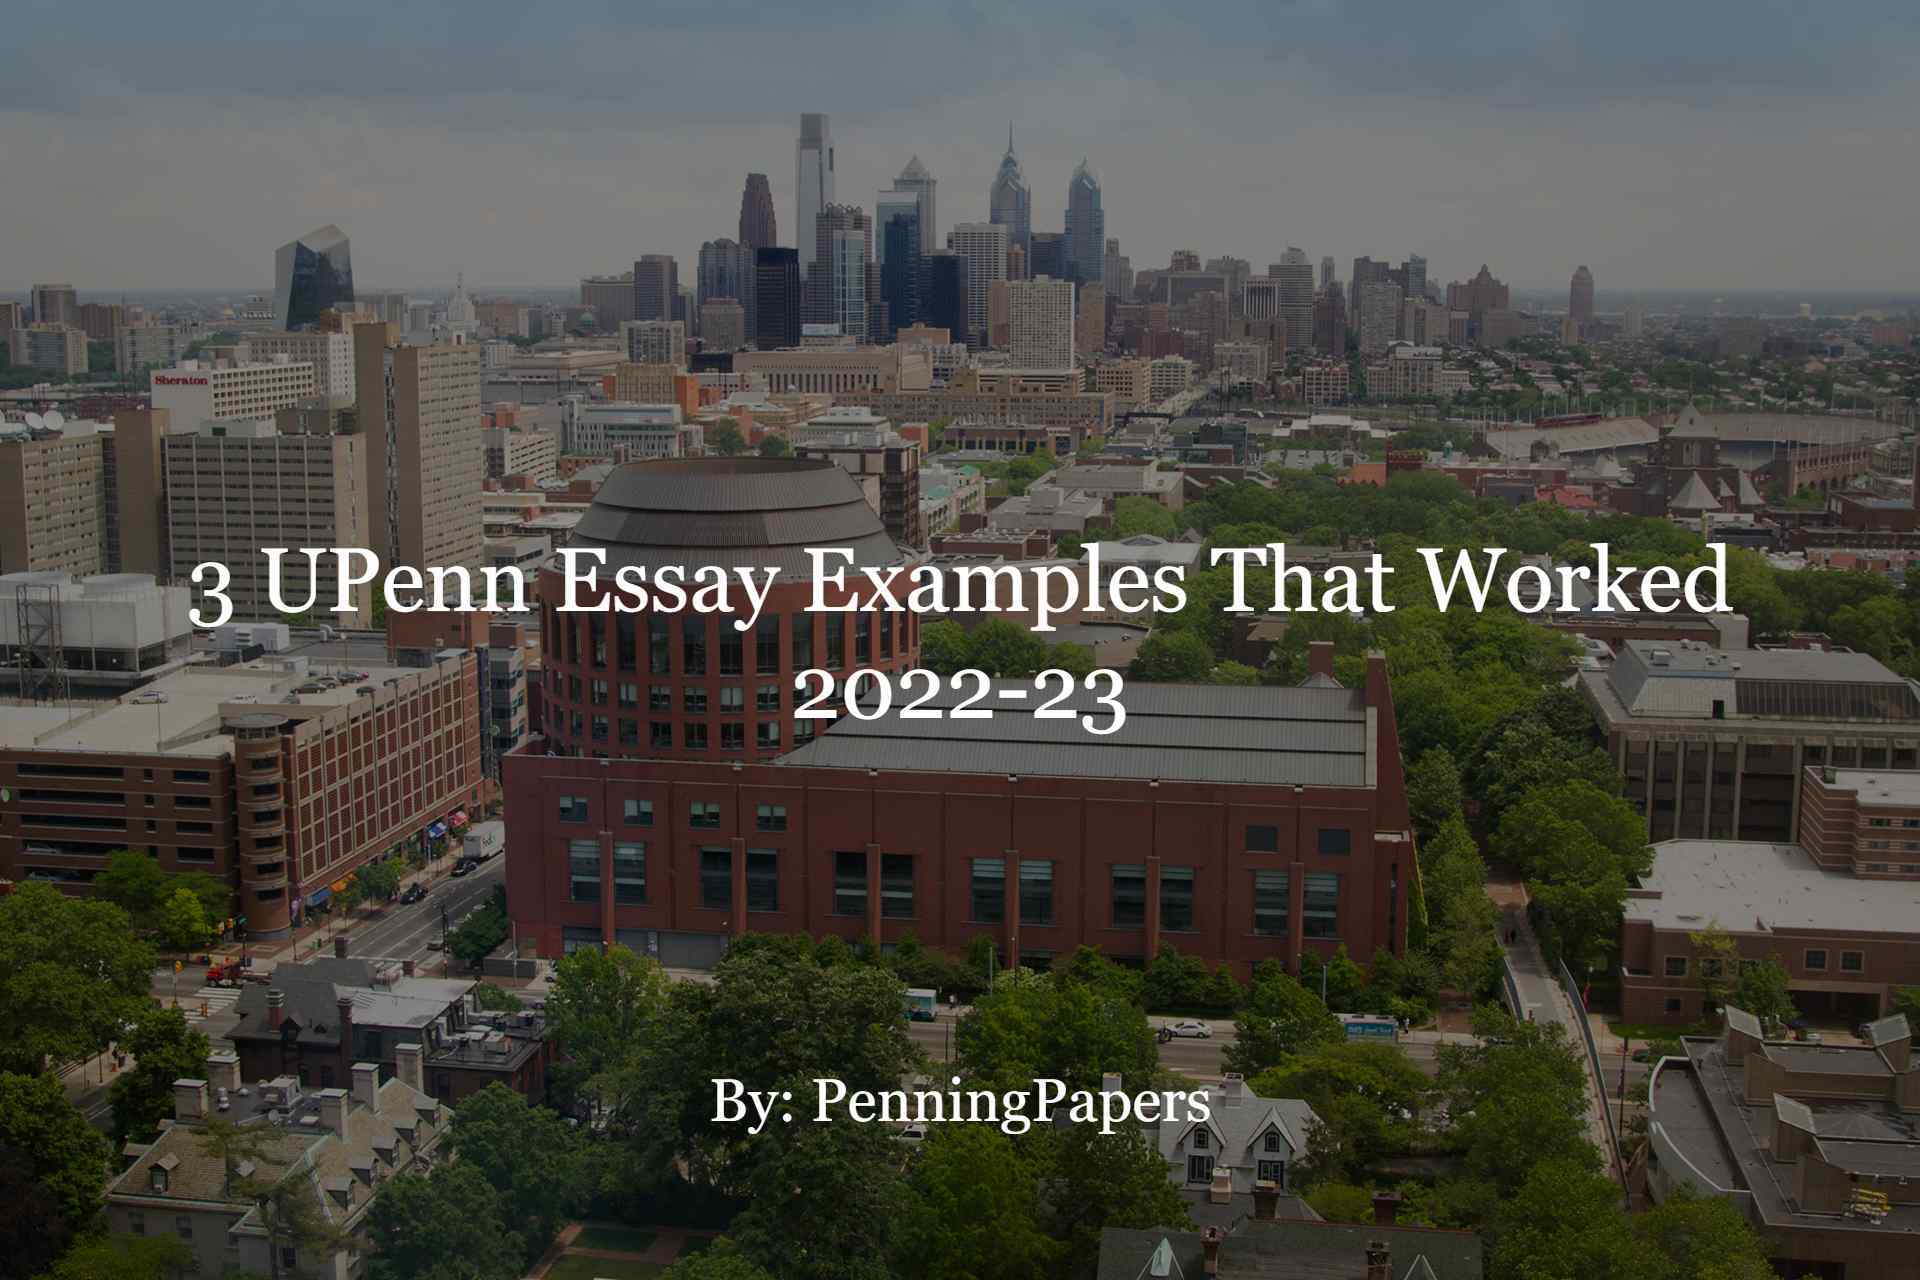 upenn college essay examples